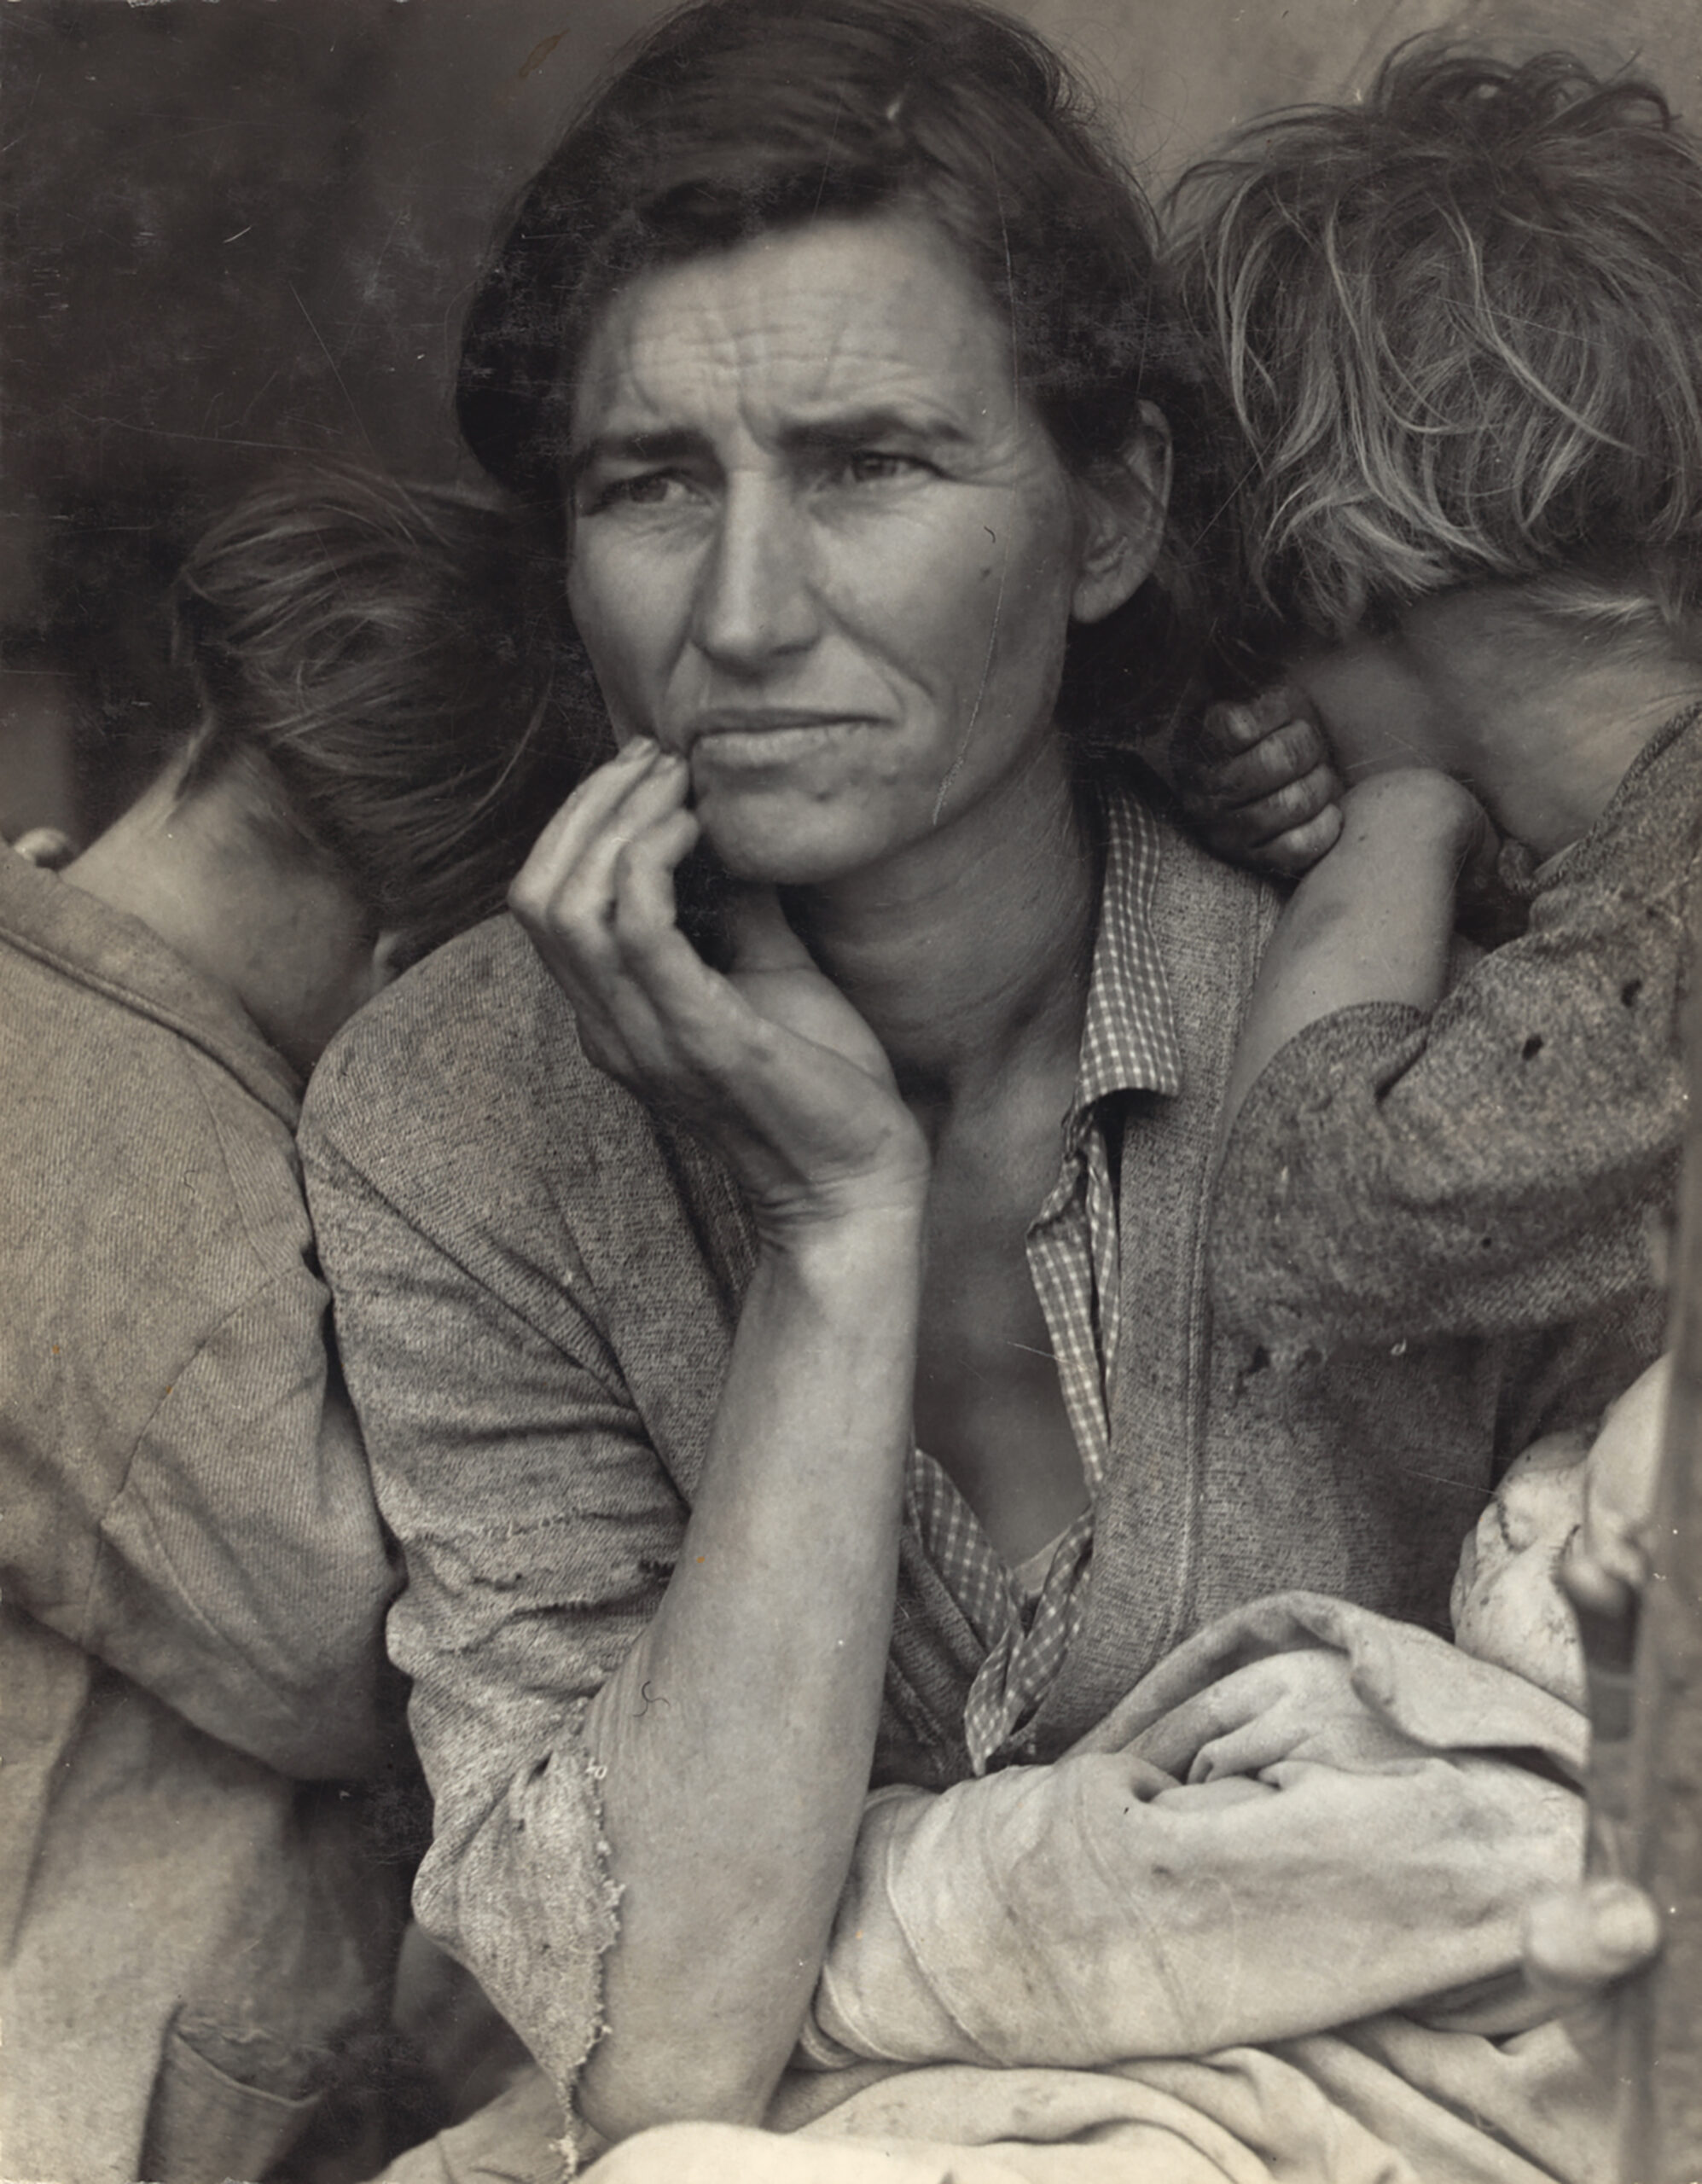 Dorothea Lange, <em>Destitute Peapickers in California, a 32-year-old Mother of Seven Children</em>, February 1936<br>Courtesy the Library of Congress”>
		</div>
		<div class=